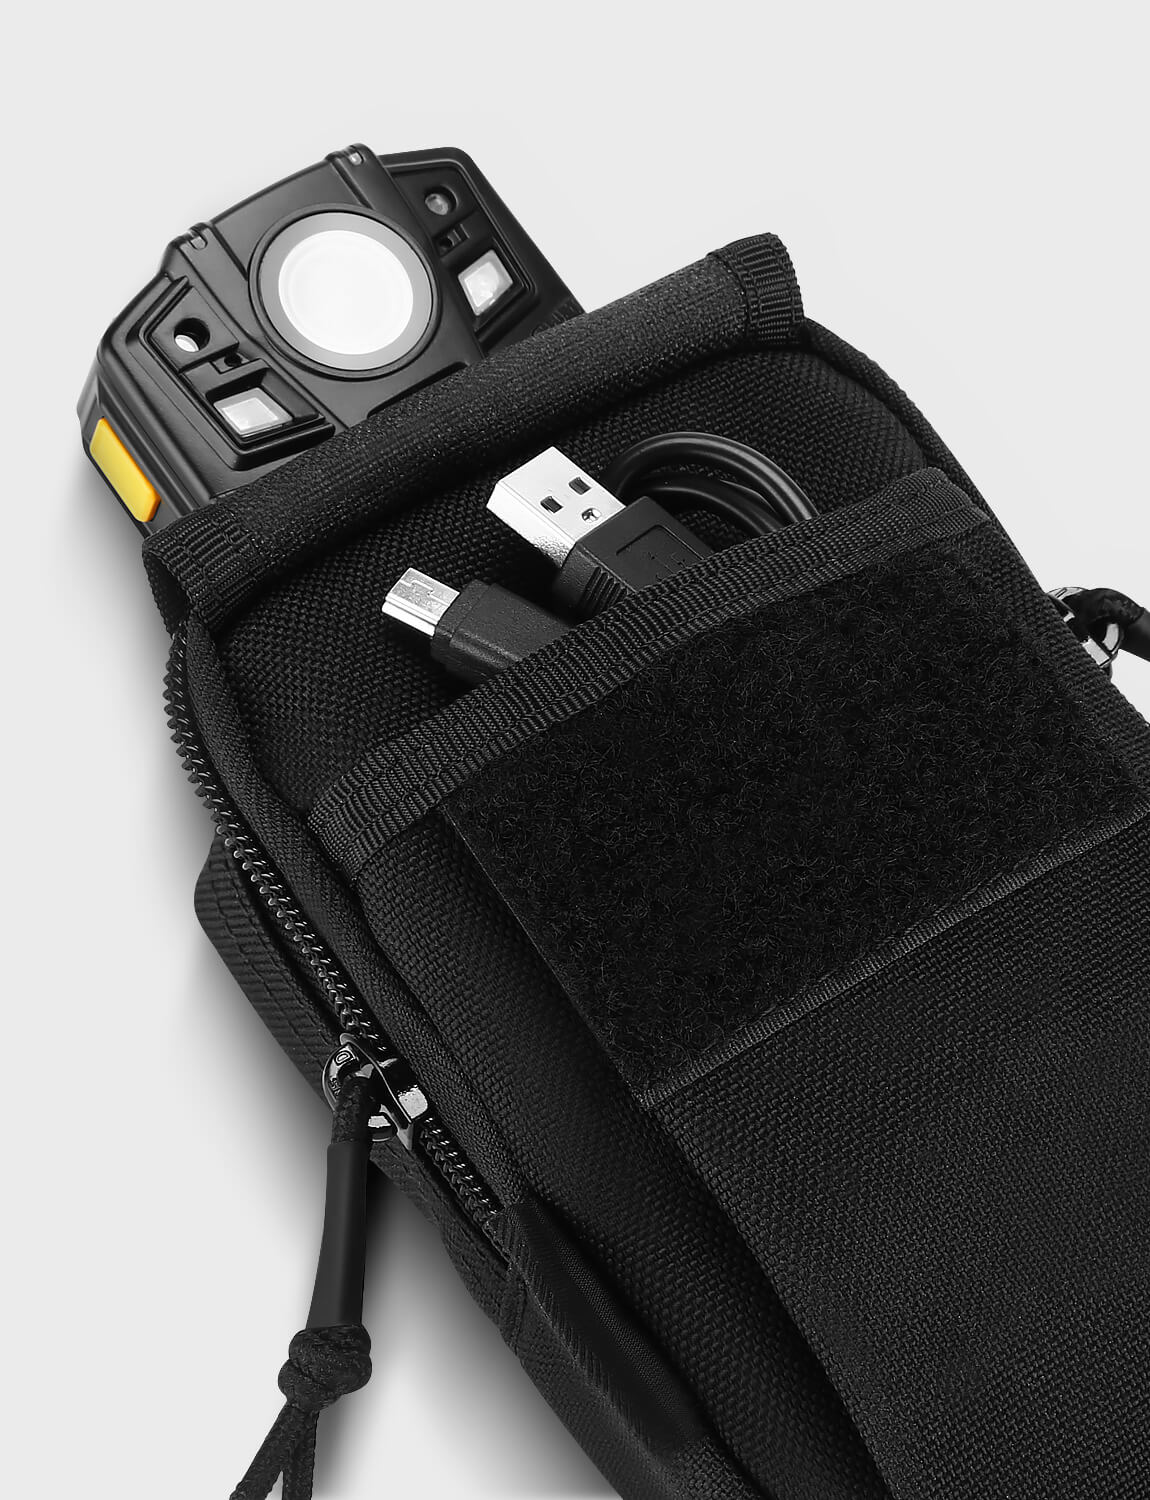 BOBLOV Body Camera Case Protection Pouch for All Brands of Body Cameras in Black7